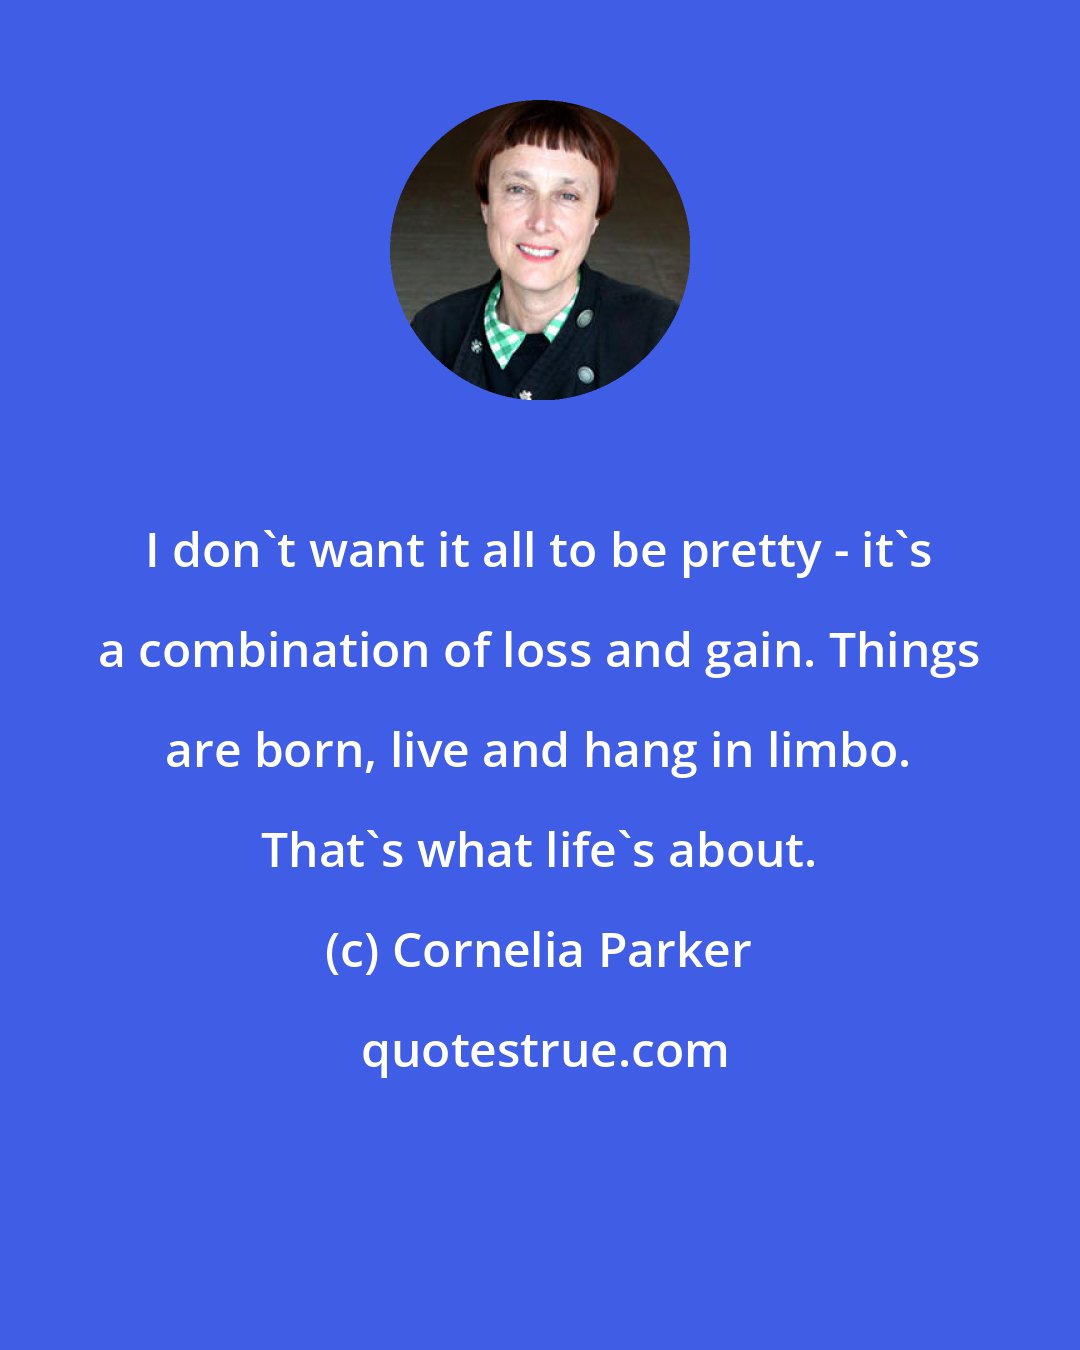 Cornelia Parker: I don't want it all to be pretty - it's a combination of loss and gain. Things are born, live and hang in limbo. That's what life's about.